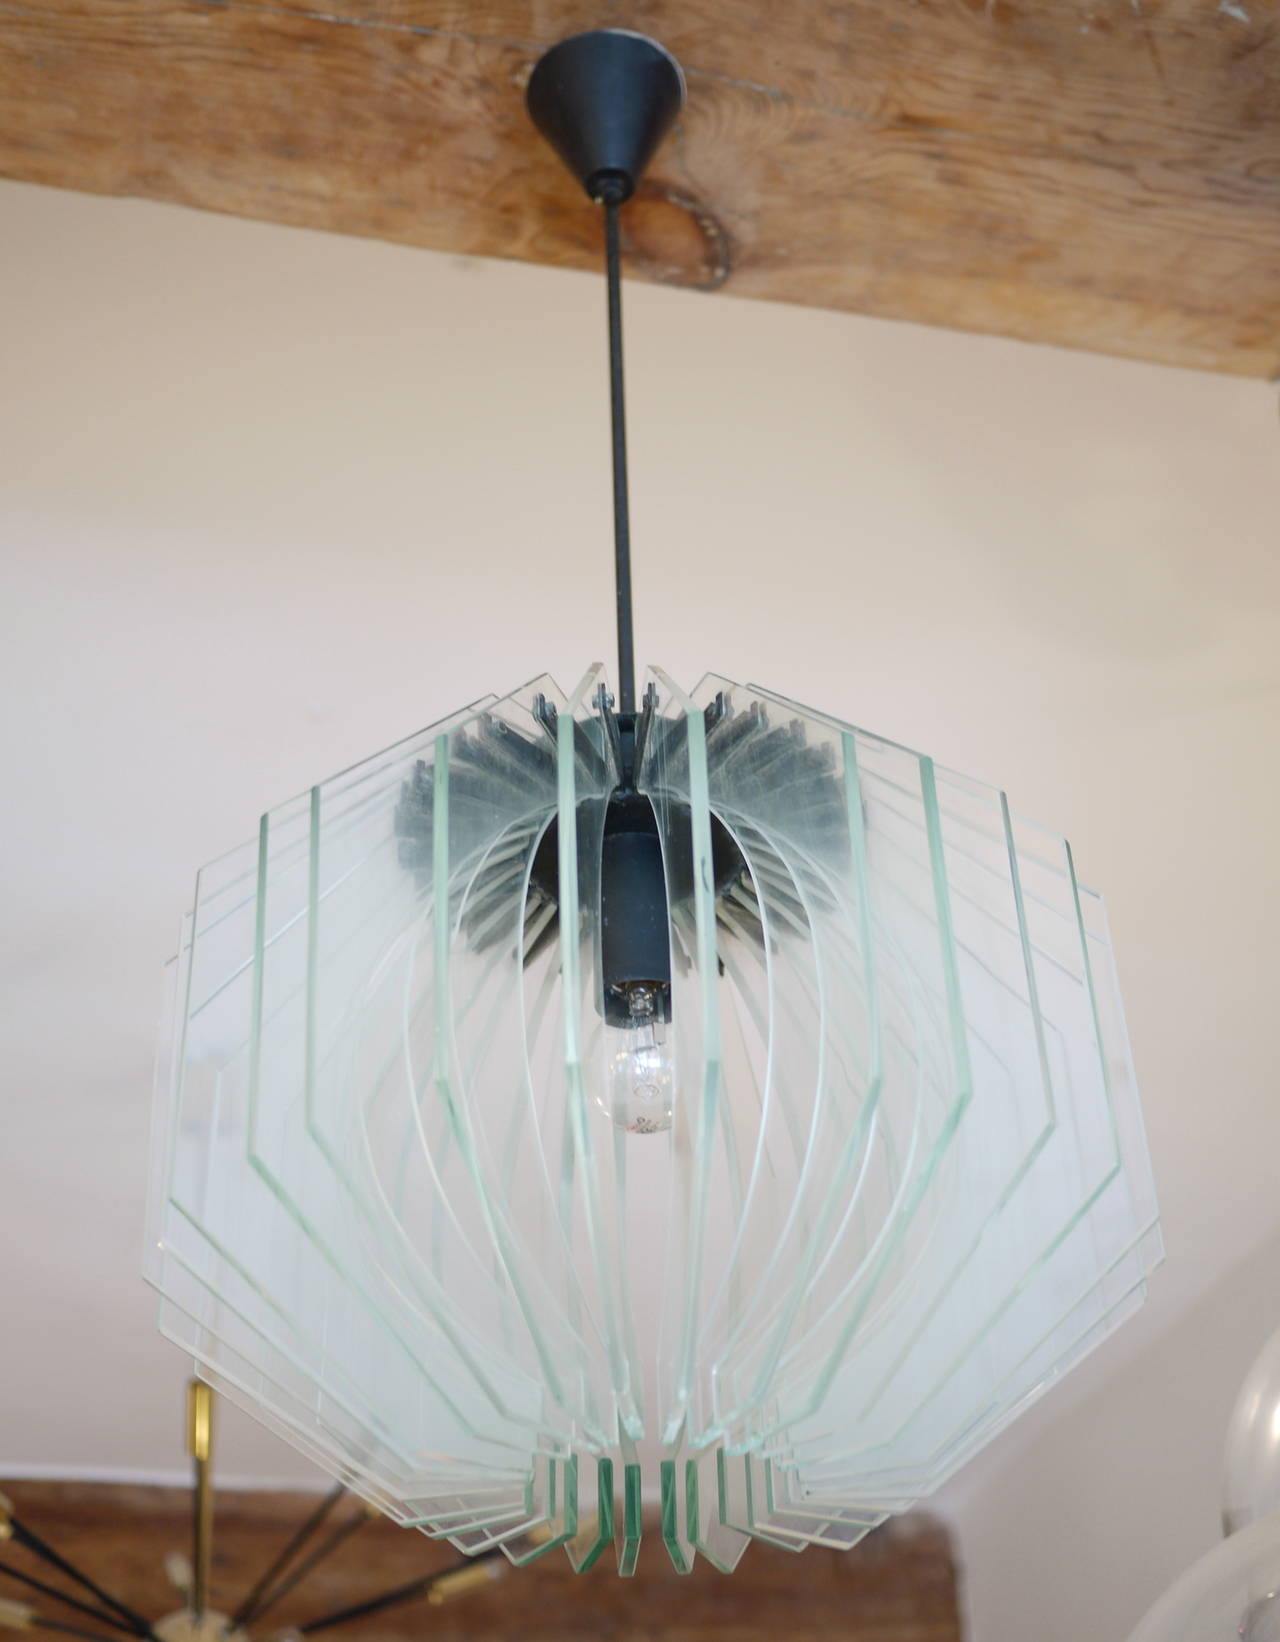 A 1960 Max Ingrand Chandelier. Crystal-cut glass and varnished metal. Bibliography: Vitrum nº 125 ,May-June 1961.